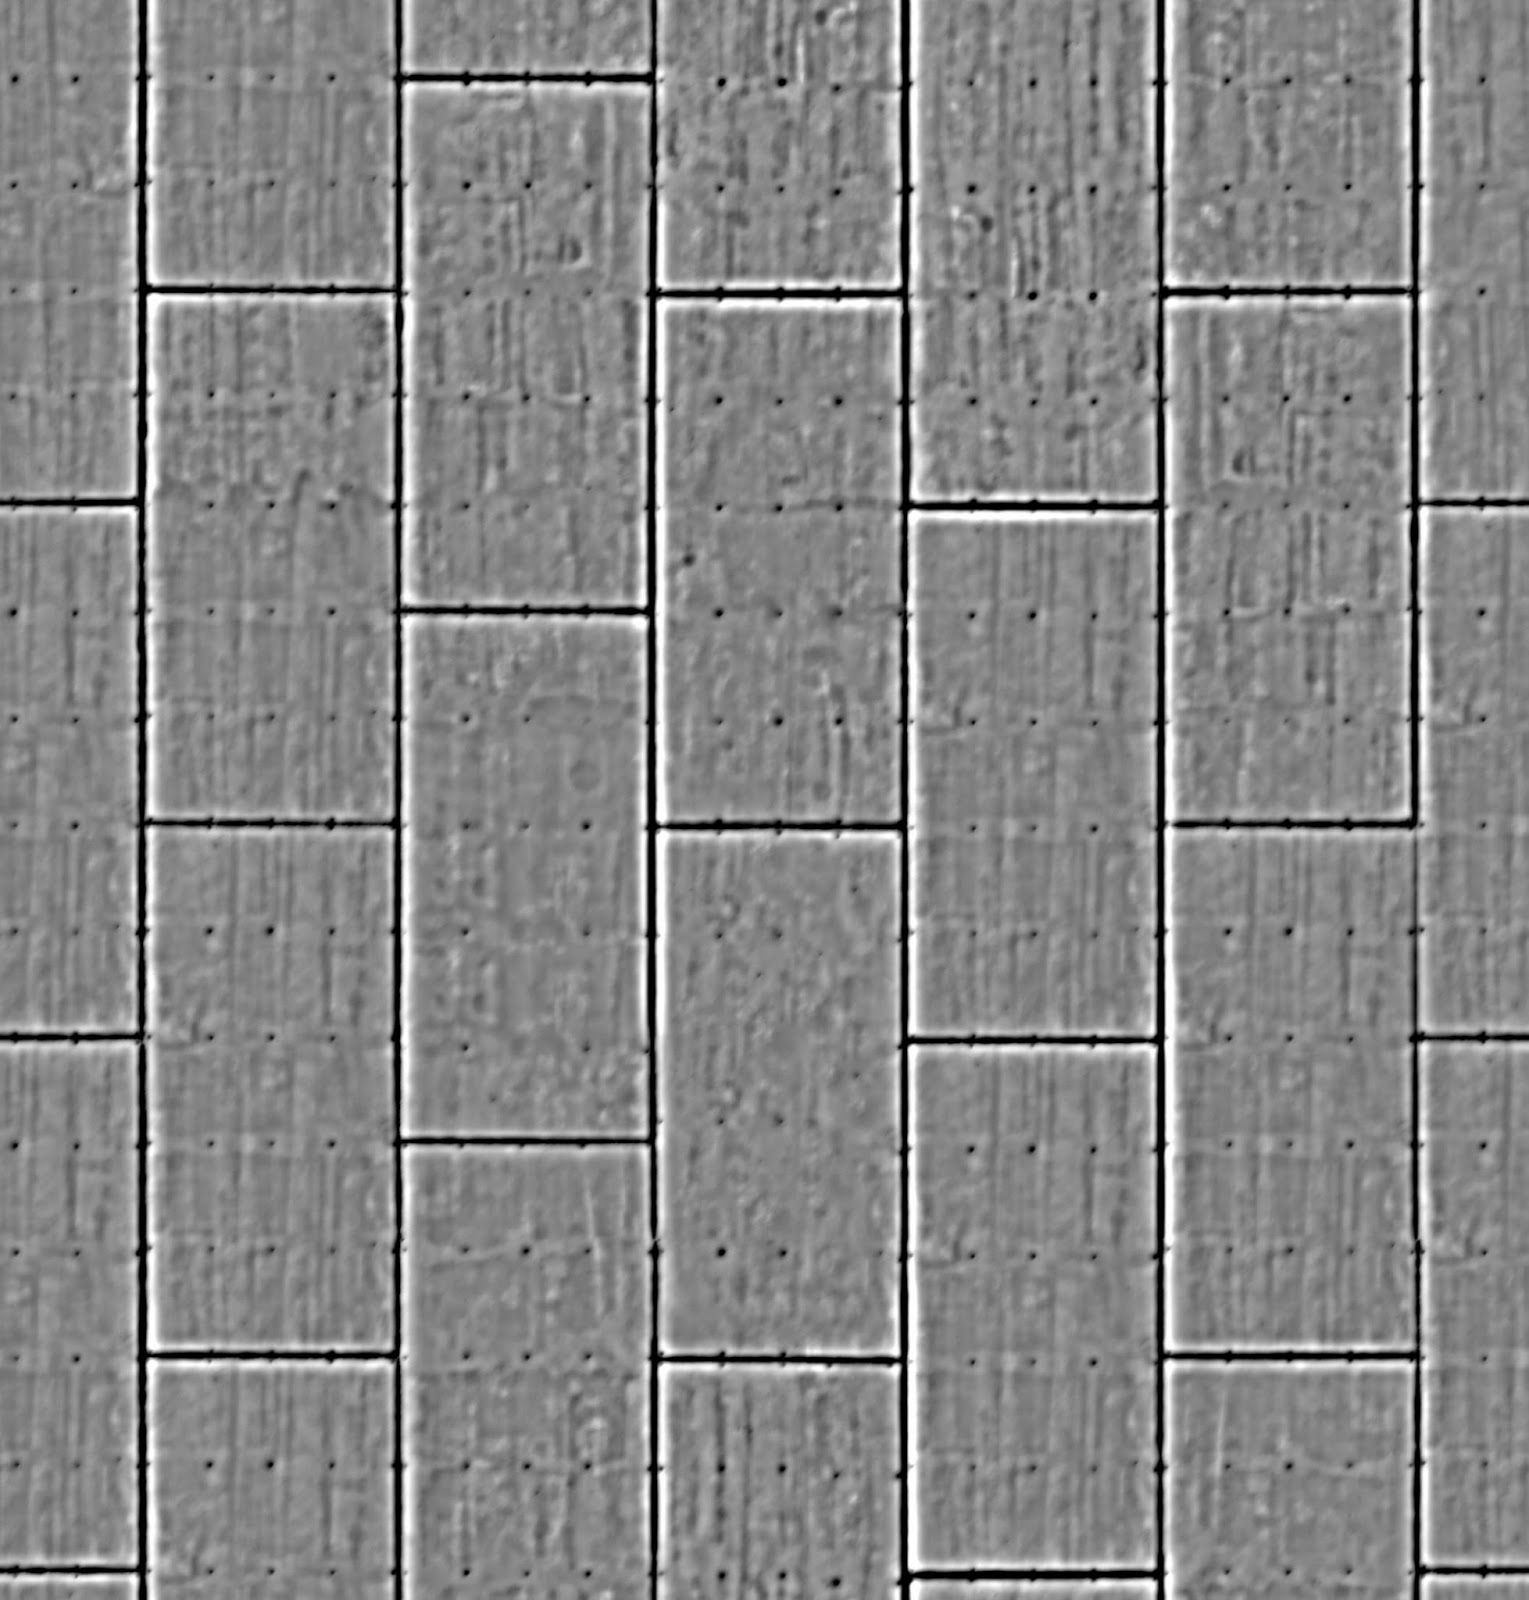 Concrete Pavement Tiled (Maps) | Texturise Free Seamless Textures With Maps